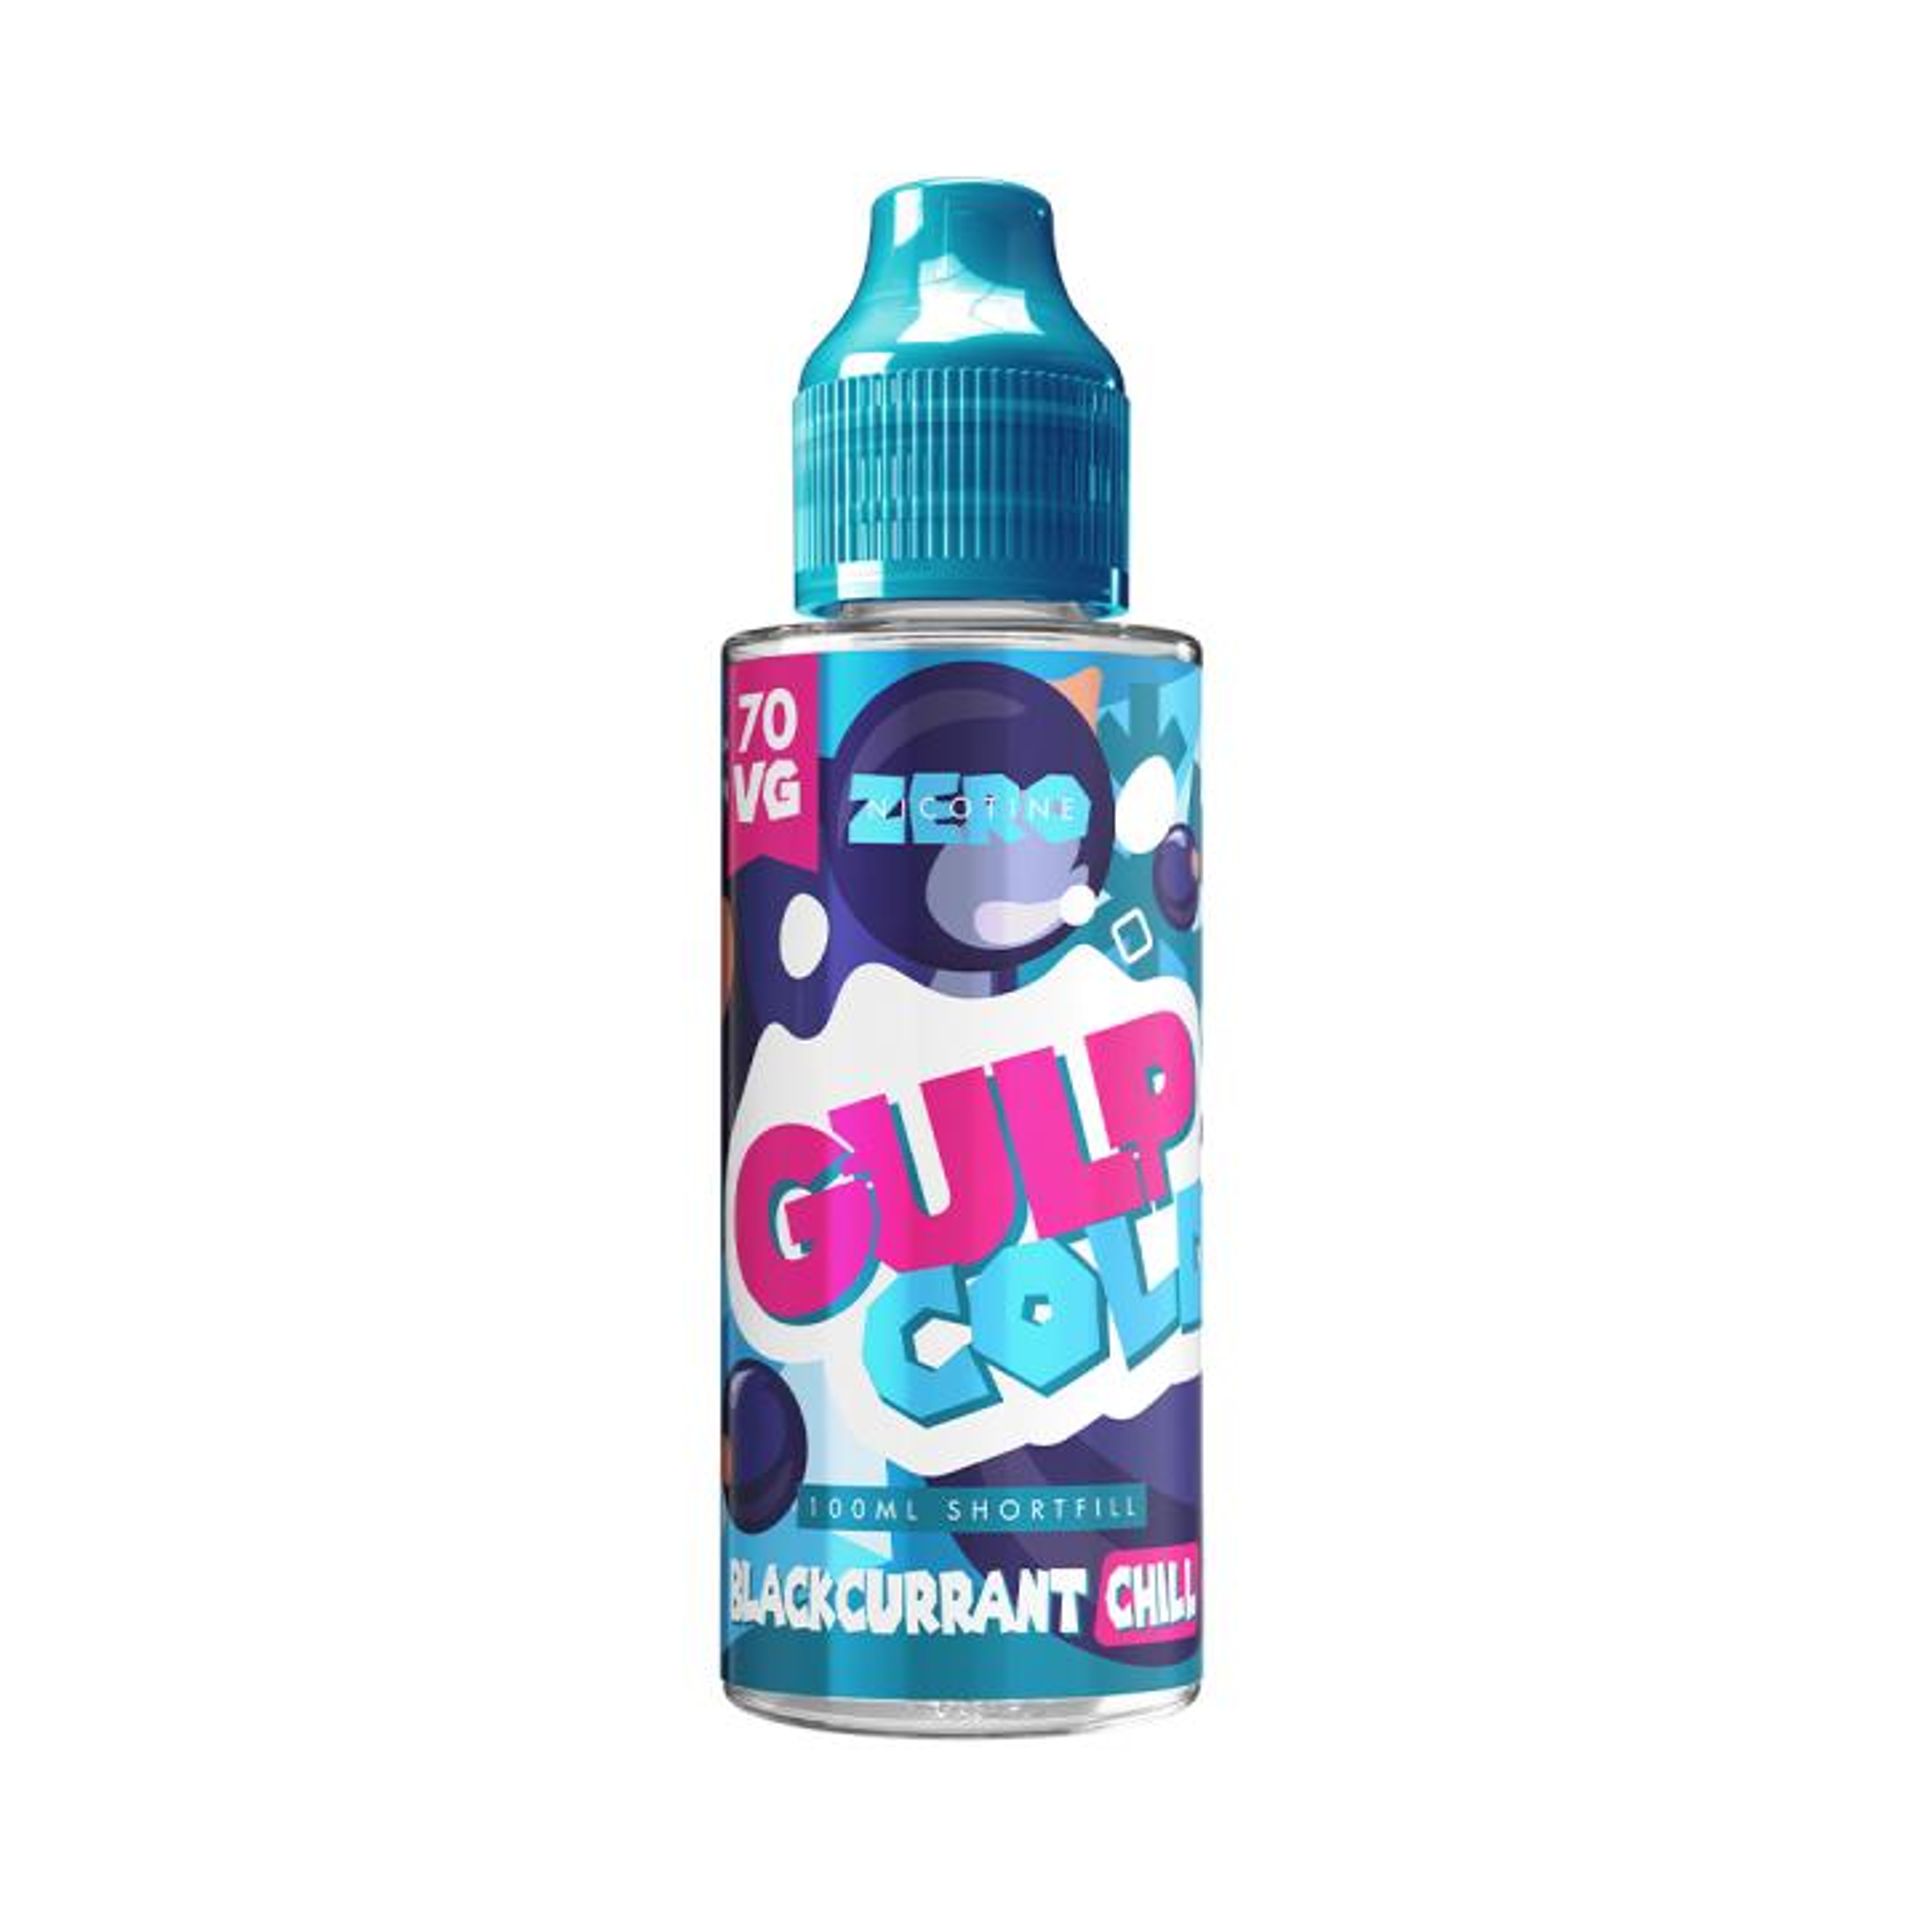 Image of Blackcurrant Chill by Gulp